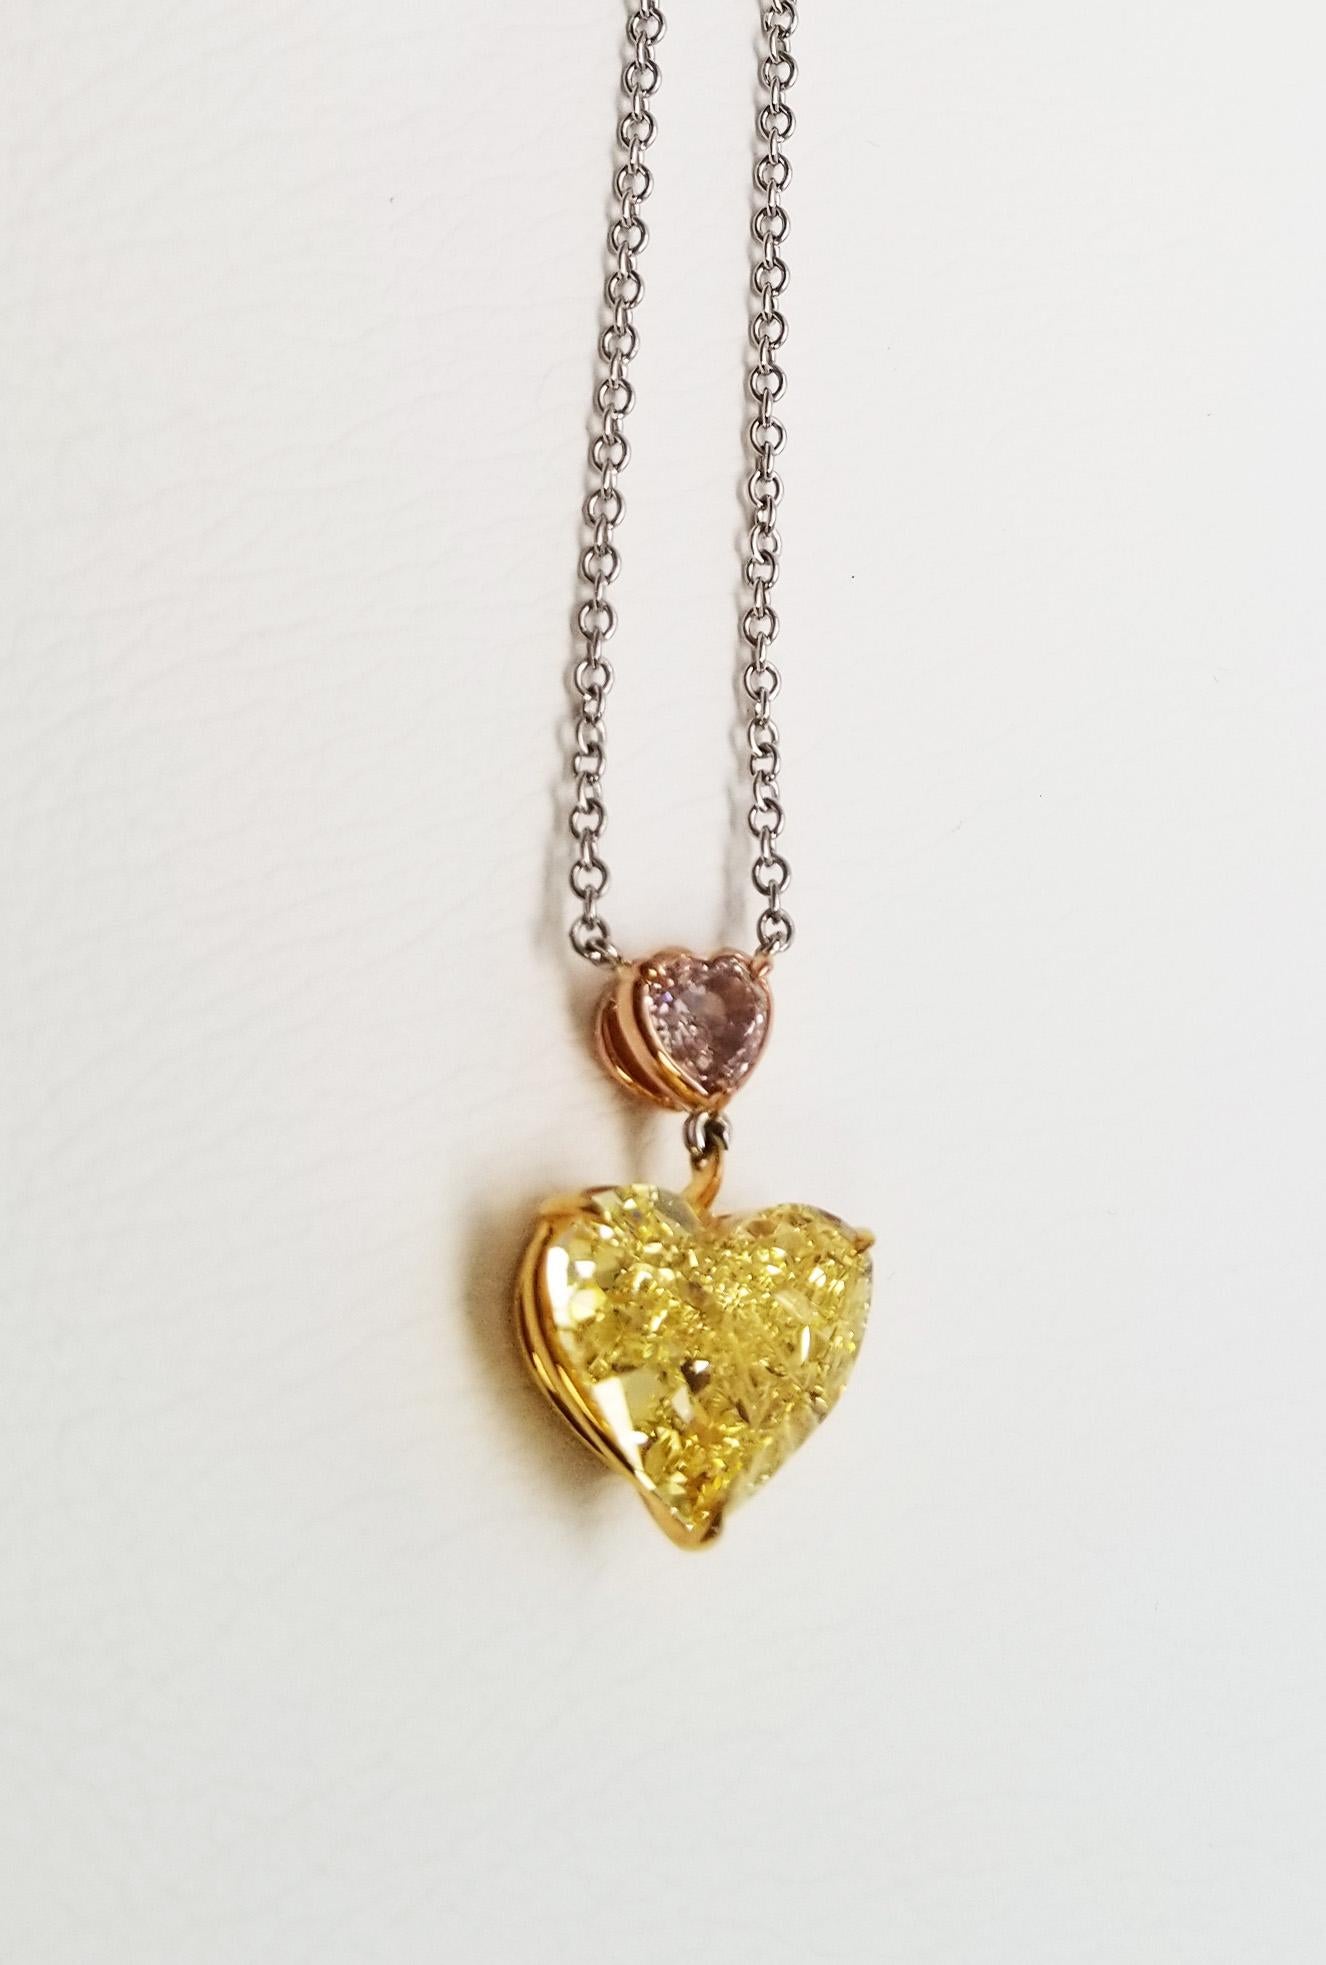 Heart Cut SCARSELLI 6 Carat Fancy Vivid Yellow Diamond Necklace GIA Certified For Sale